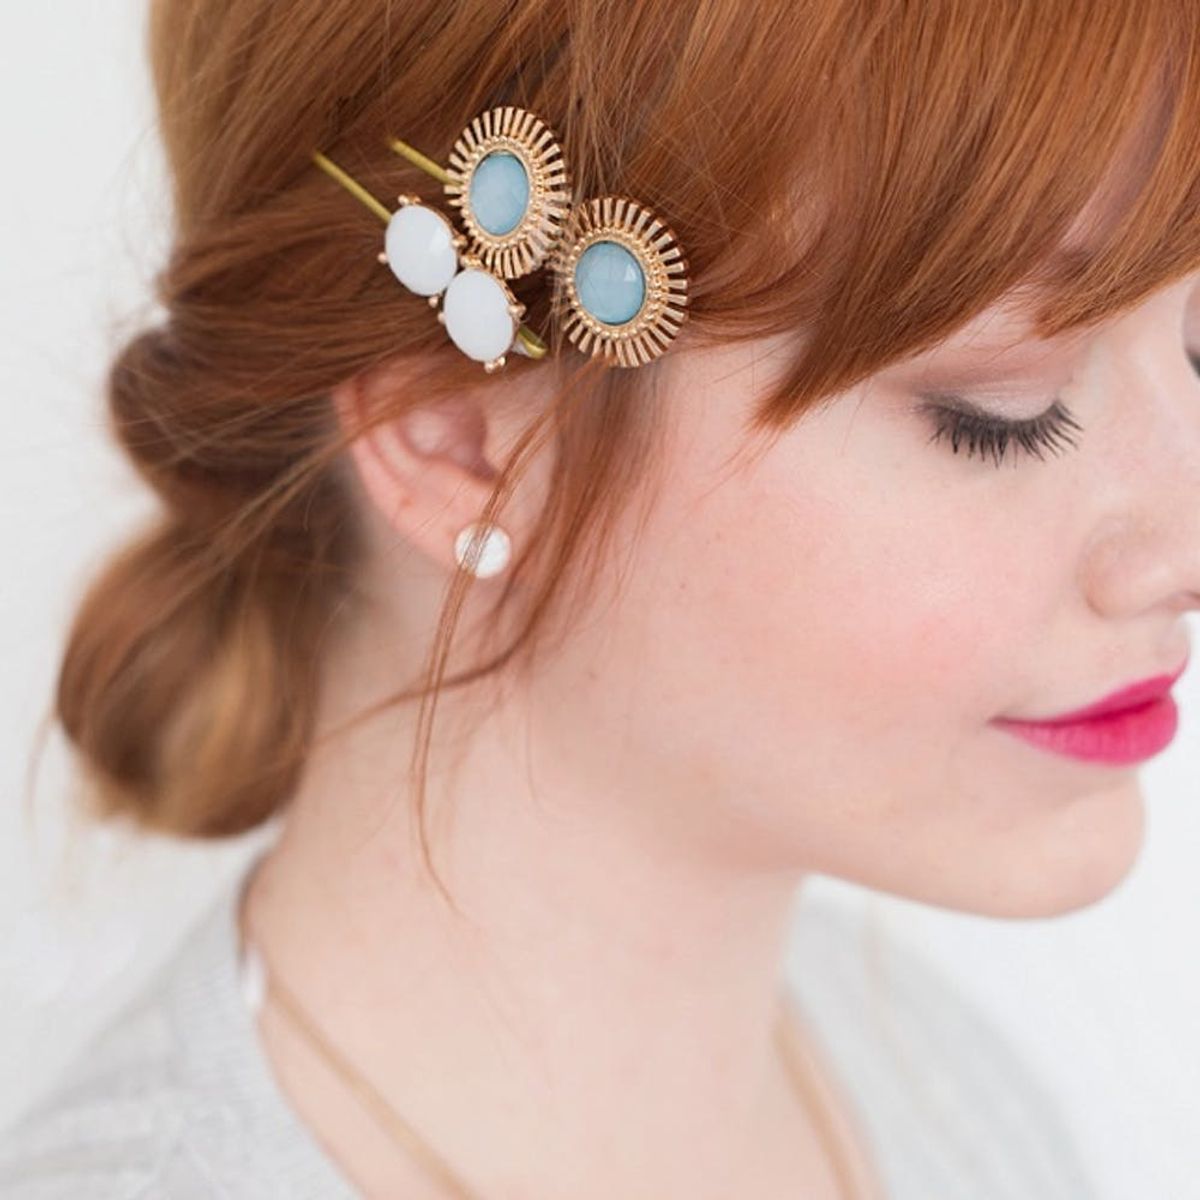 How to Make Gemstone Bobby Pins for the Best DIY Valentine’s Day Gift Ever